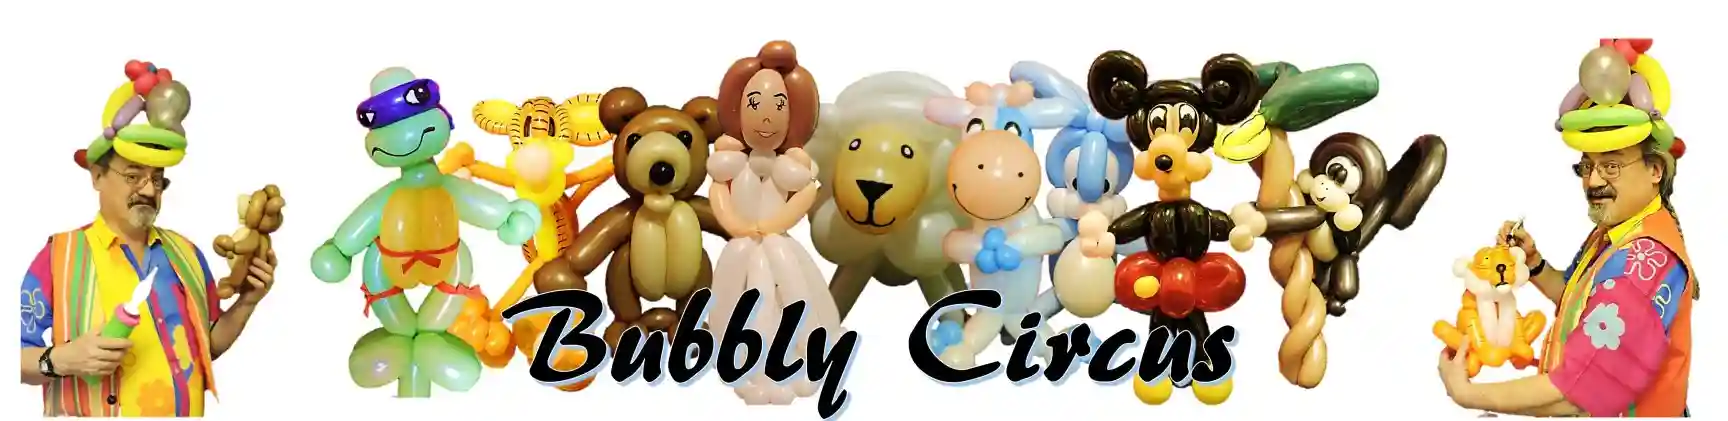 Bubbly Circus Banner